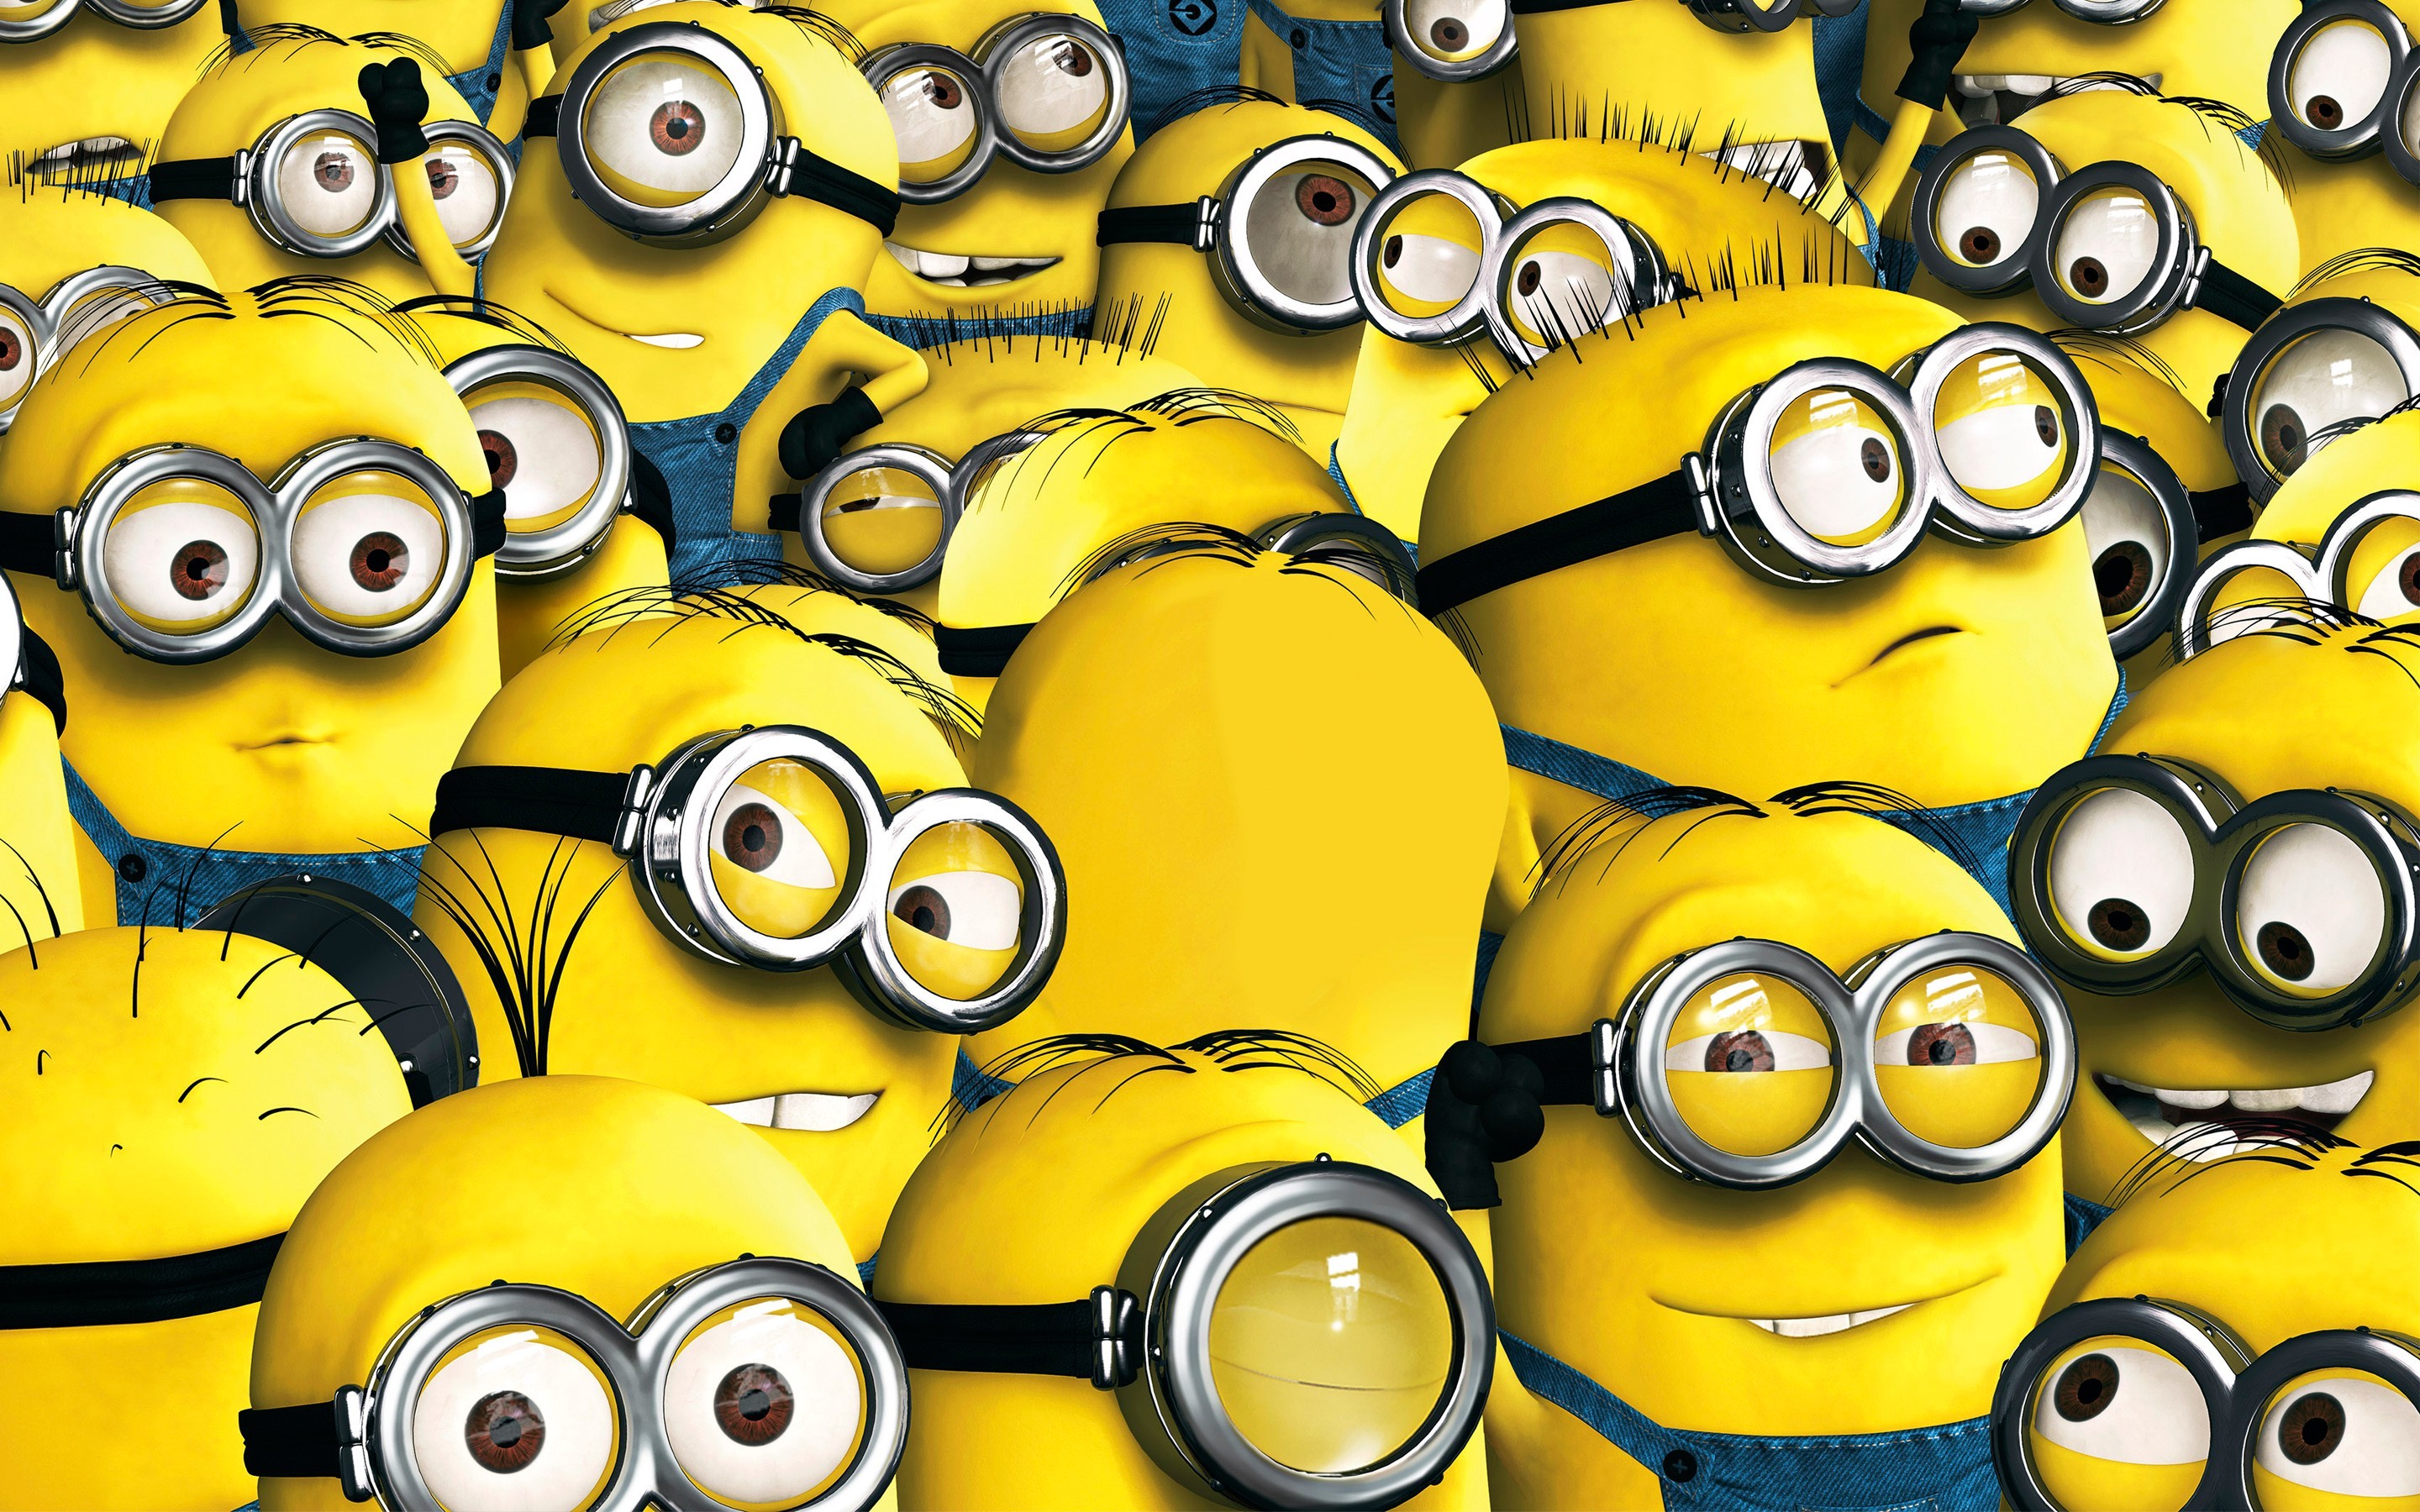 2880x1800 ... download deable me minions hd 4k wallpapers in 2048x1152 ...